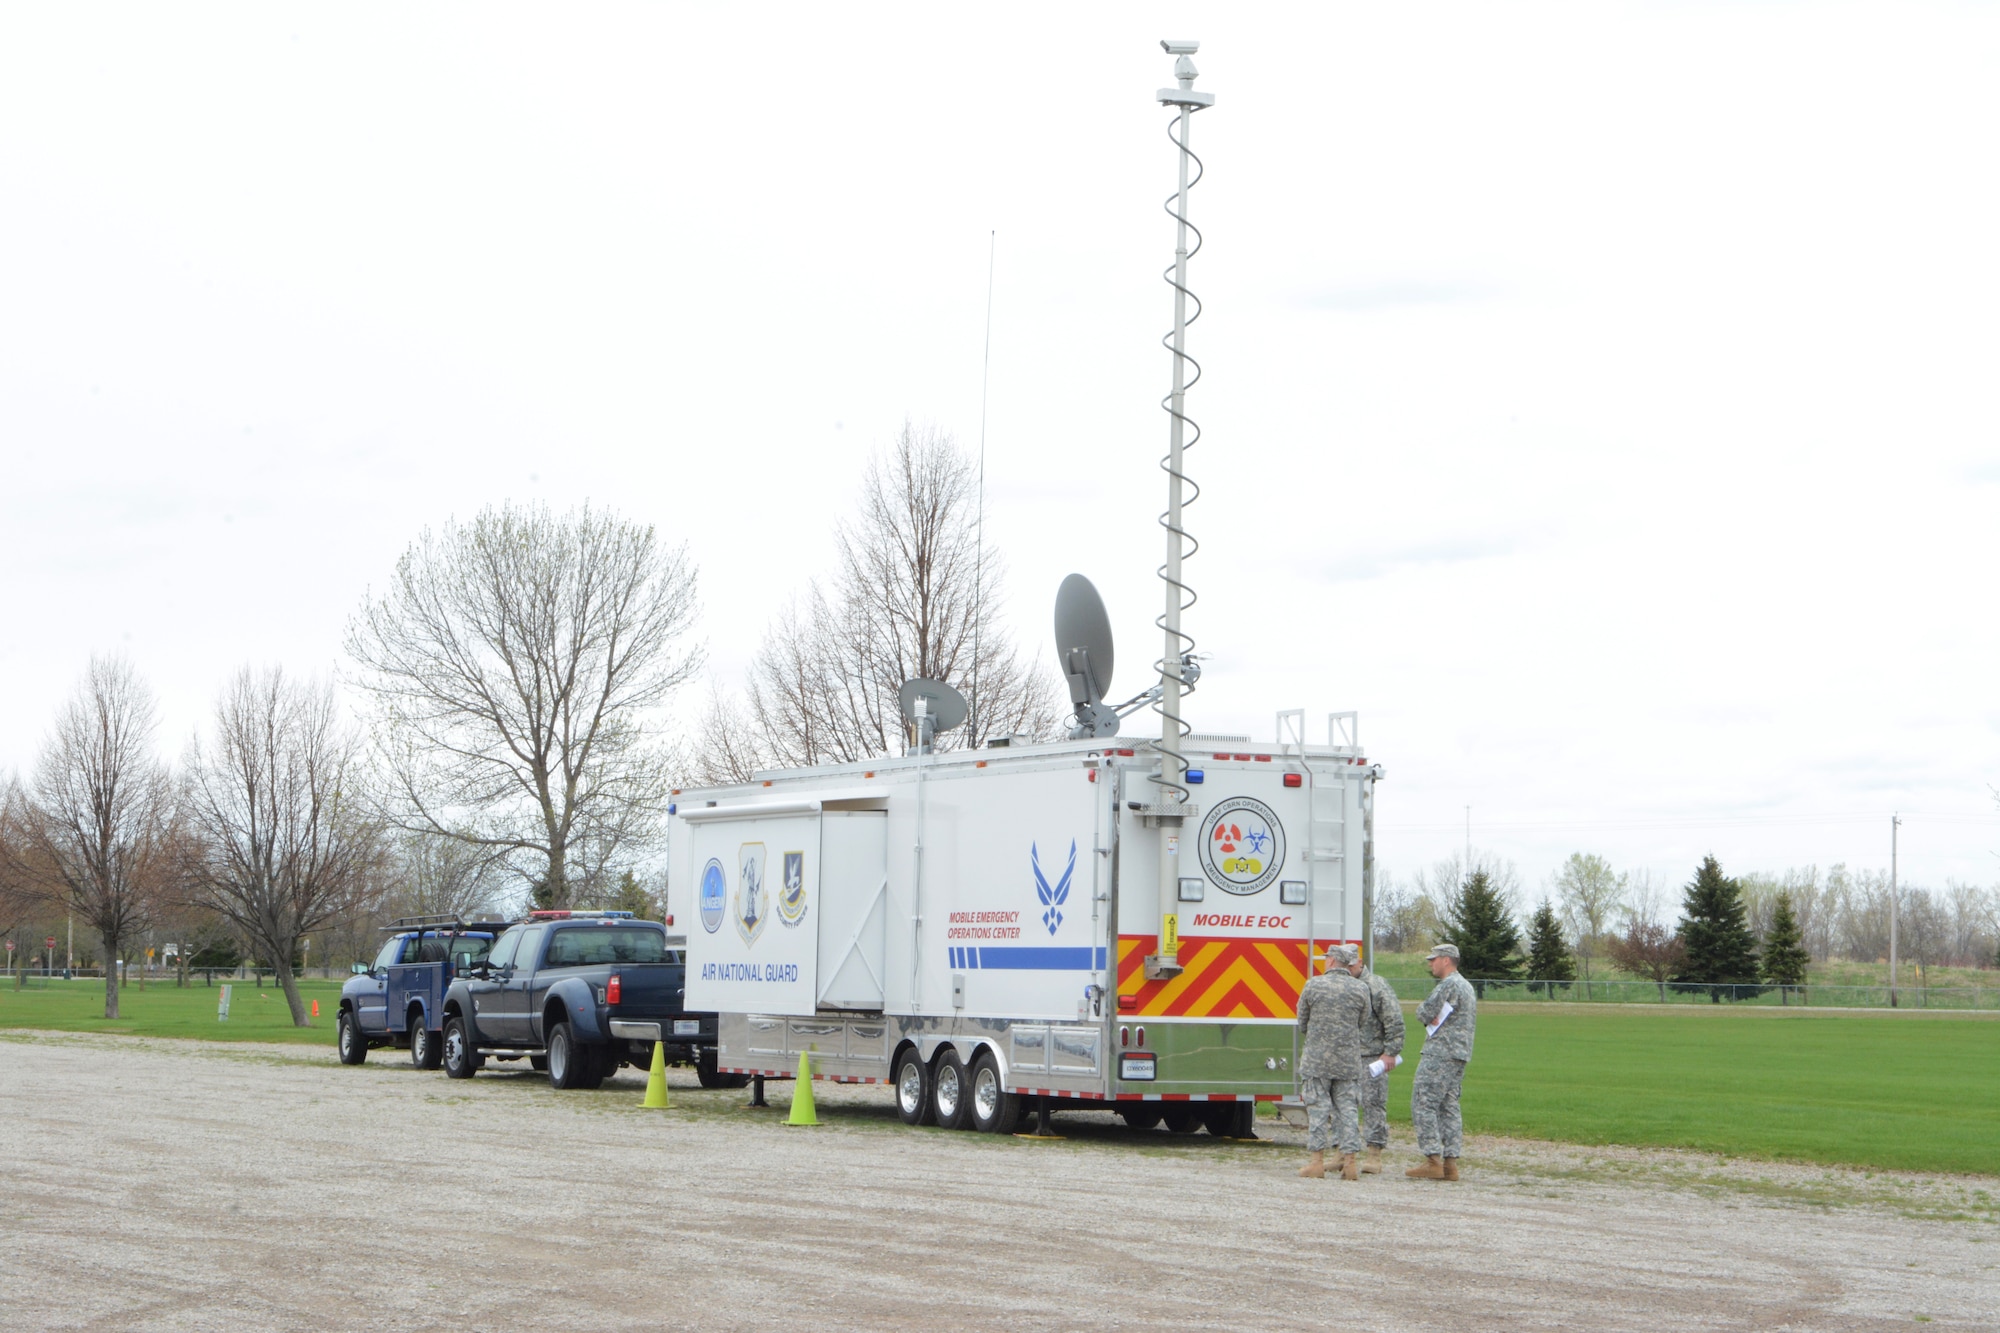 The Air National Guard’s Mobile Emergency Operations Center was brought in from Peoria, Ill. for the 2014 State Interoperable Mobile Communications Exercise in the parking lot of the Sunnyview Exposition Center in Oshkosh, Wis., May 15, 2014. The MEOC serves as a go-to should anyone have trouble making their radio communication connections. (Air National Guard photo by Senior Airman Andrea F. Liechti)